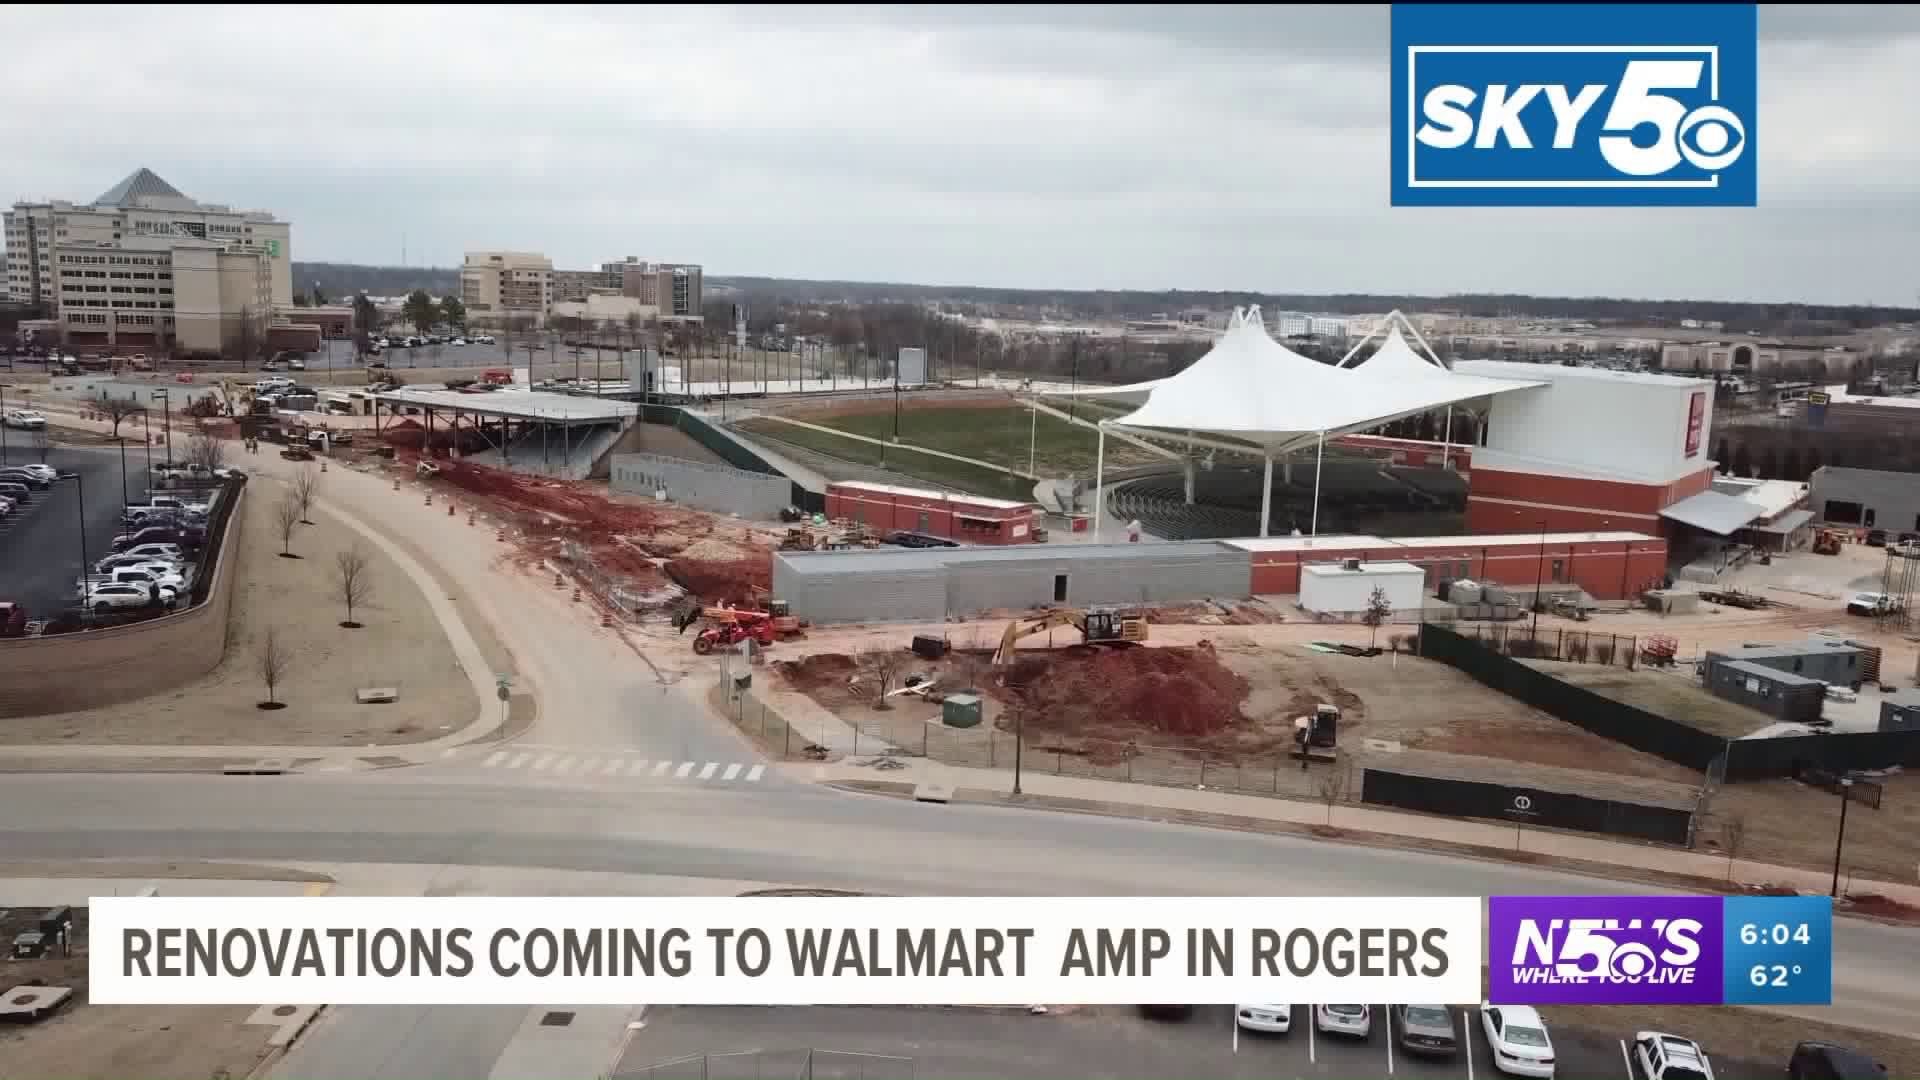 Construction Continues On Expansion At The Walmart AMP